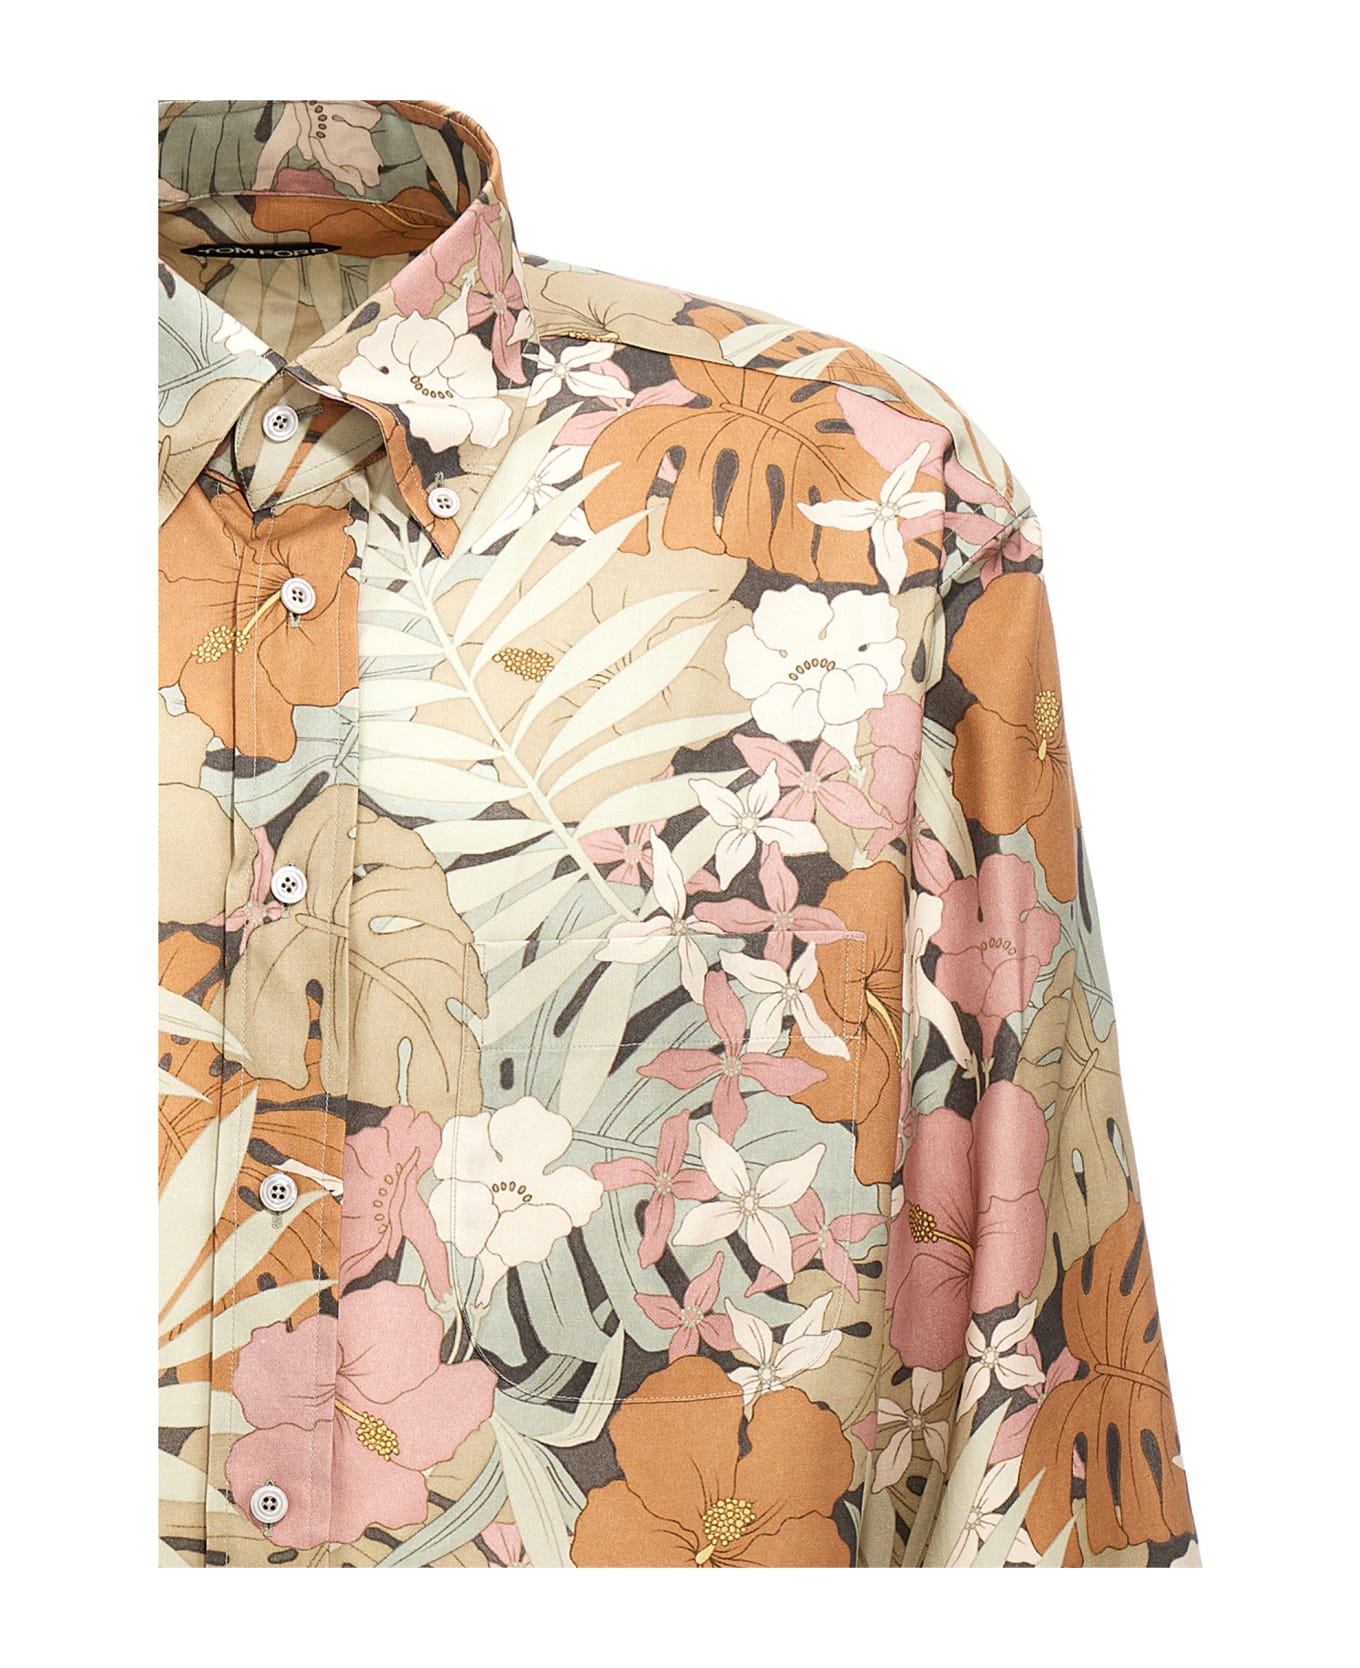 Tom Ford Floral Shirt - Red